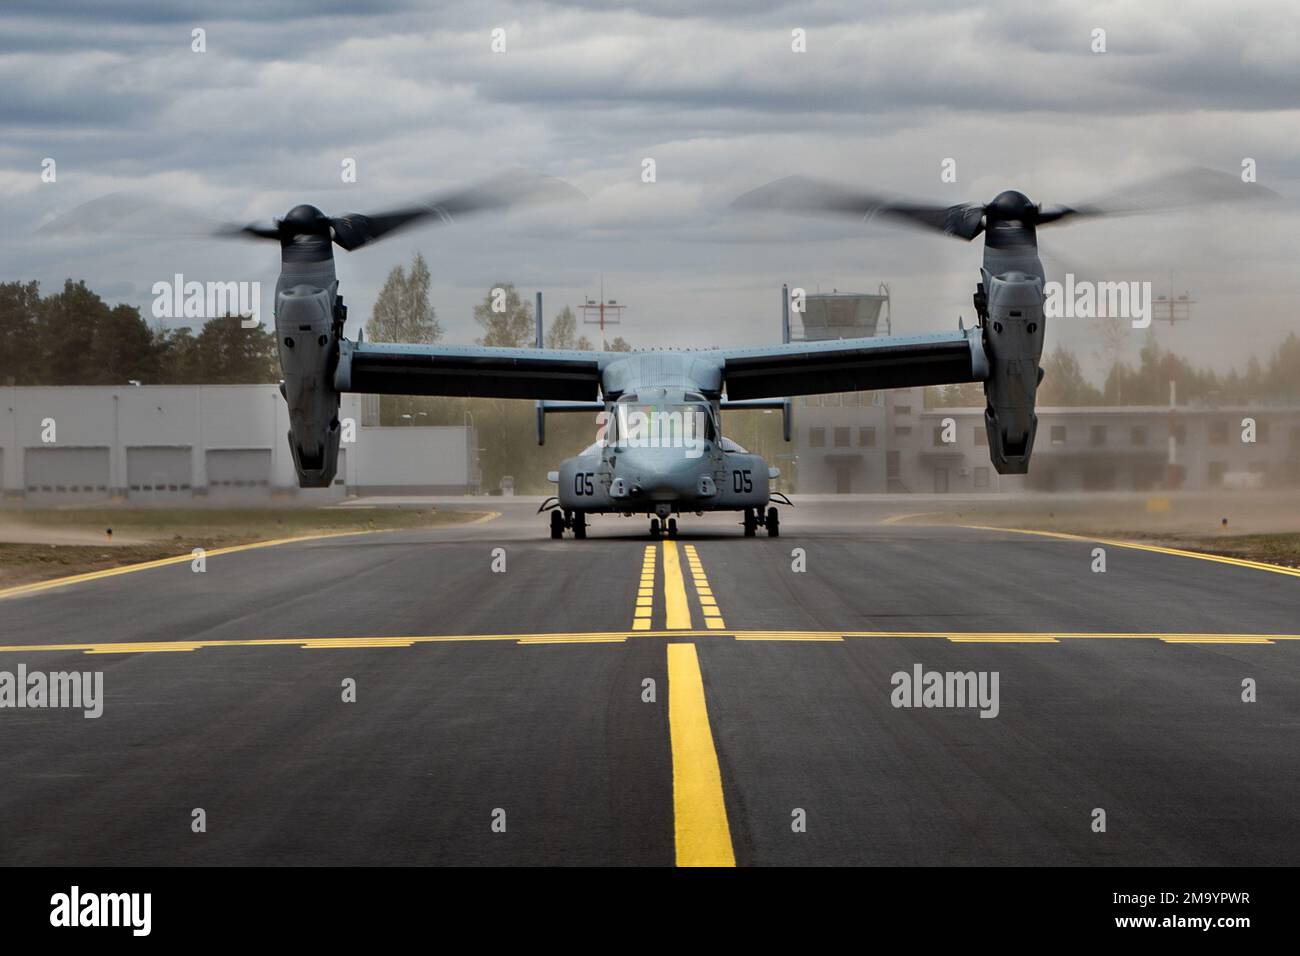 A U.S. Marine Corps MV-22 Osprey, assigned to the Aviation Combat Element, 22nd Marine Expeditionary Unit, takes off from Parnu Airfield, Parnu, Estonia, to return to Wasp-class amphibious assault ship USS Kearsarge (LHD 3), during ship-to-shore movements May 21, 2022. The 22nd MEU is participating in the Estonian-led exercise Siil 22 (Hedgehog 22 in English). Hedgehog 22 brings together members of the Estonian Defense Force and Sailors and Marines under Commander Task Force 61/2 to enhance allied interoperability and preserve security and stability in the Baltic region. Stock Photo